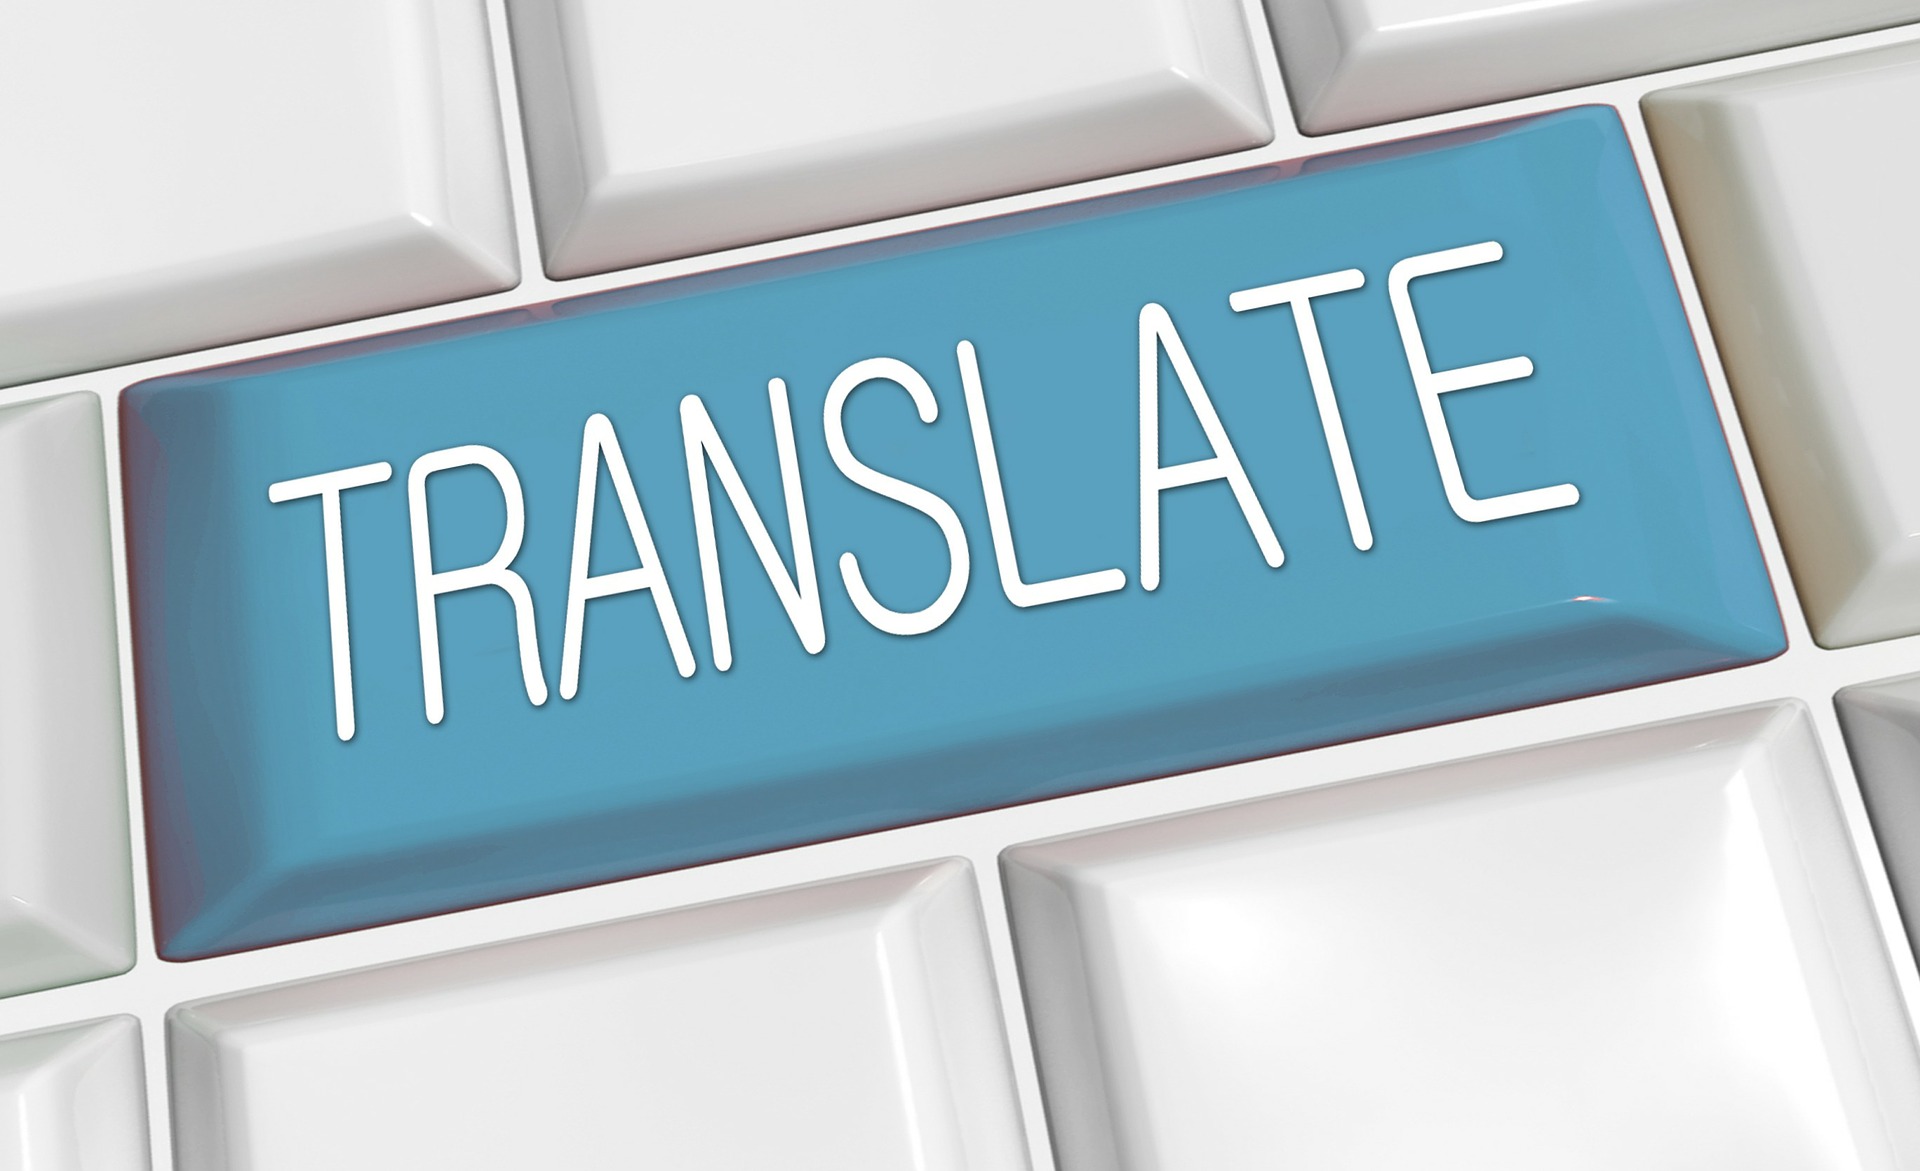 The General Consulate of Italy has only been accepting translations made by translators accredited with the General Consulate